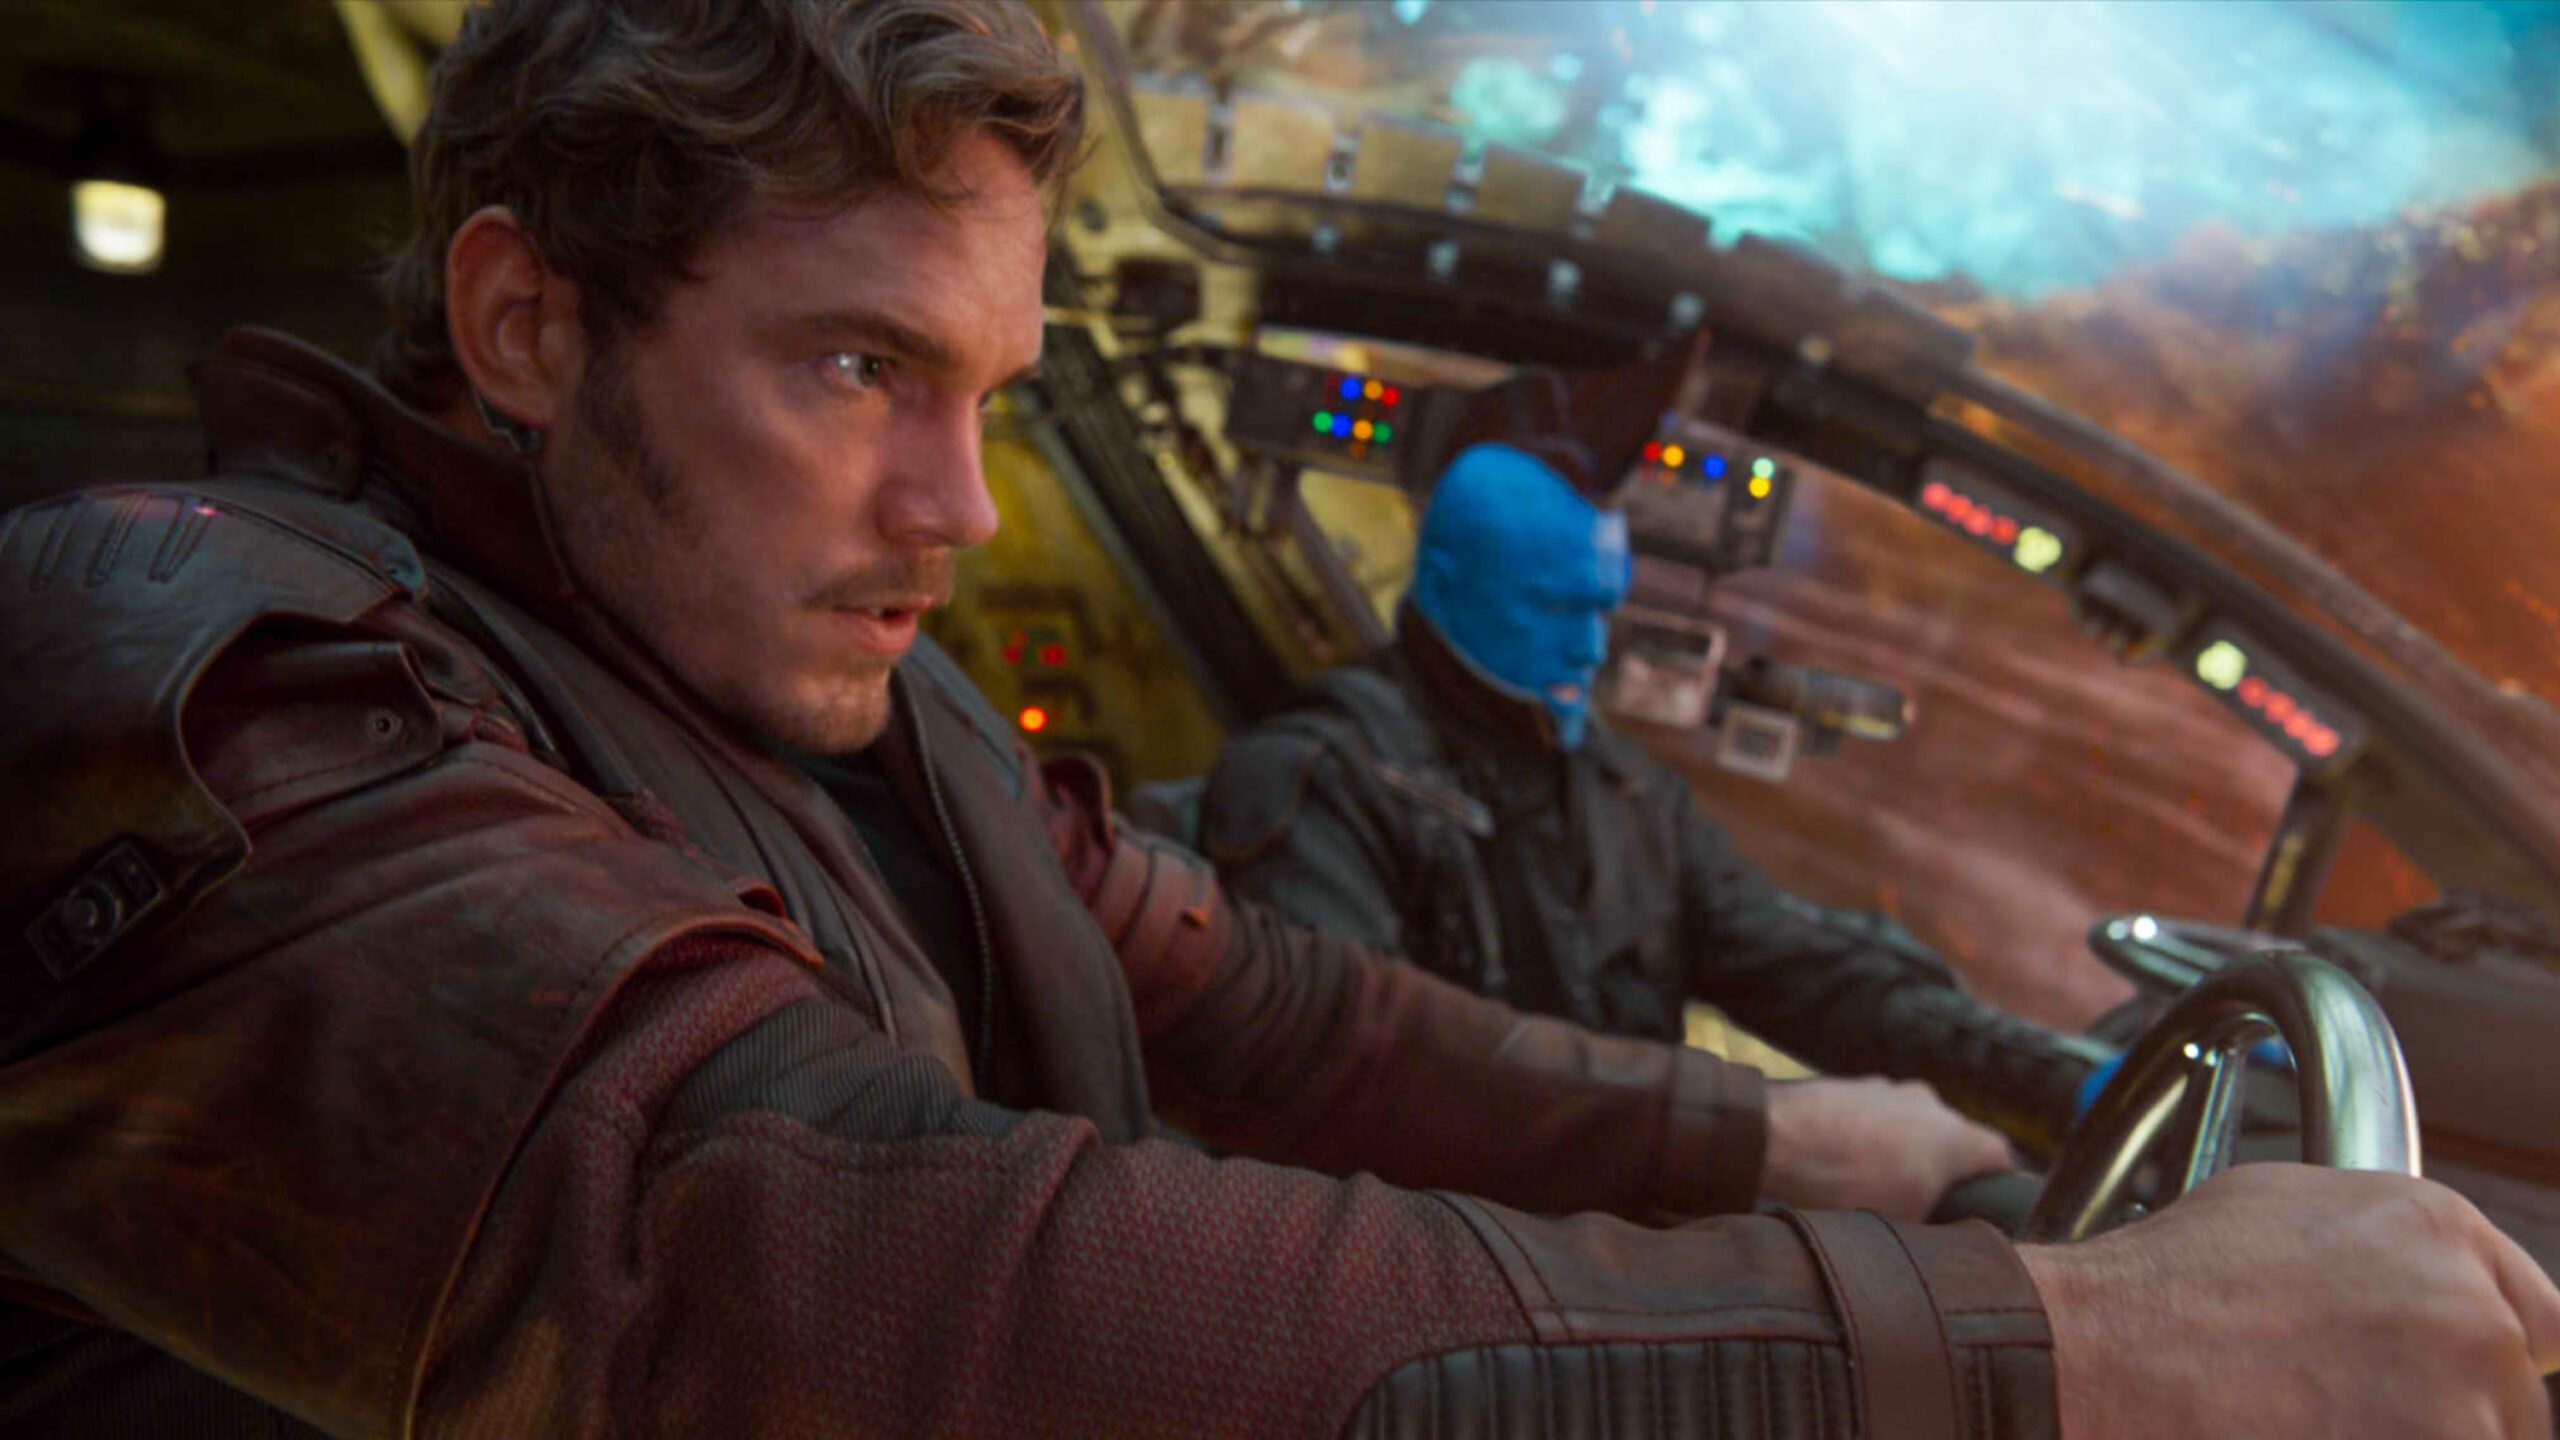 ‘Guardians of the Galaxy Vol. 2’ review: A whole lot of fun